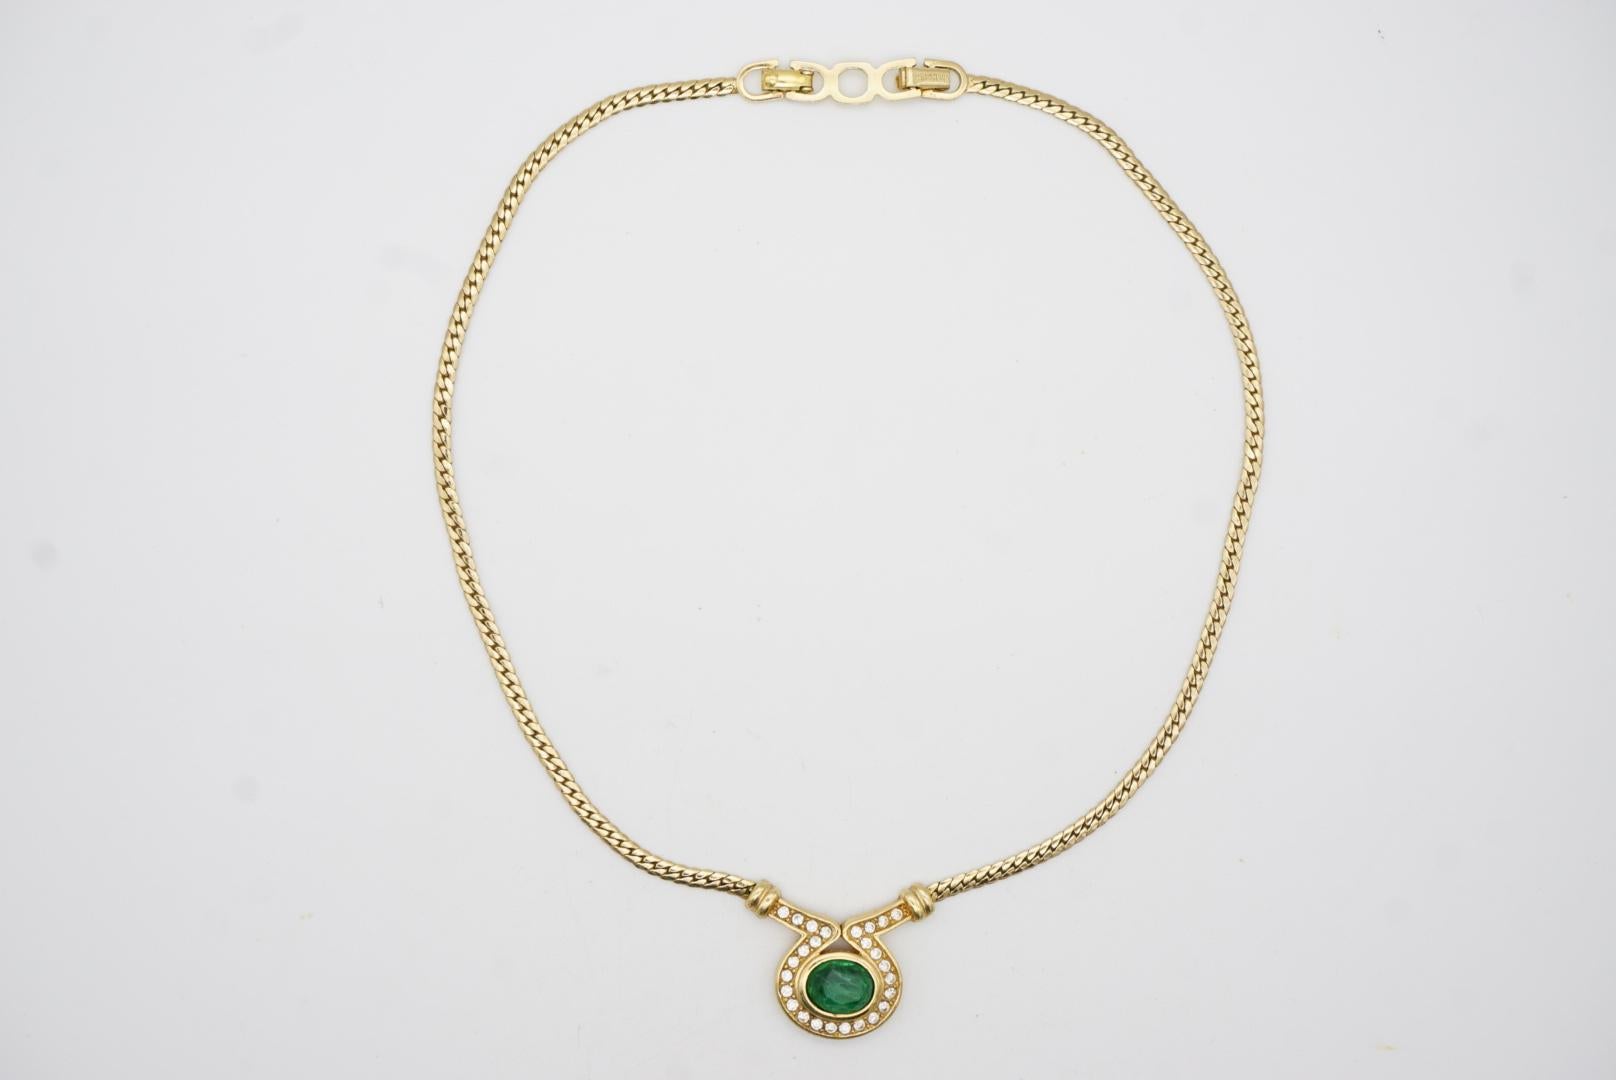 Christian Dior Vintage 1980s Emerald Green Gripoix Oval Pendant Crystal Necklace For Sale 4